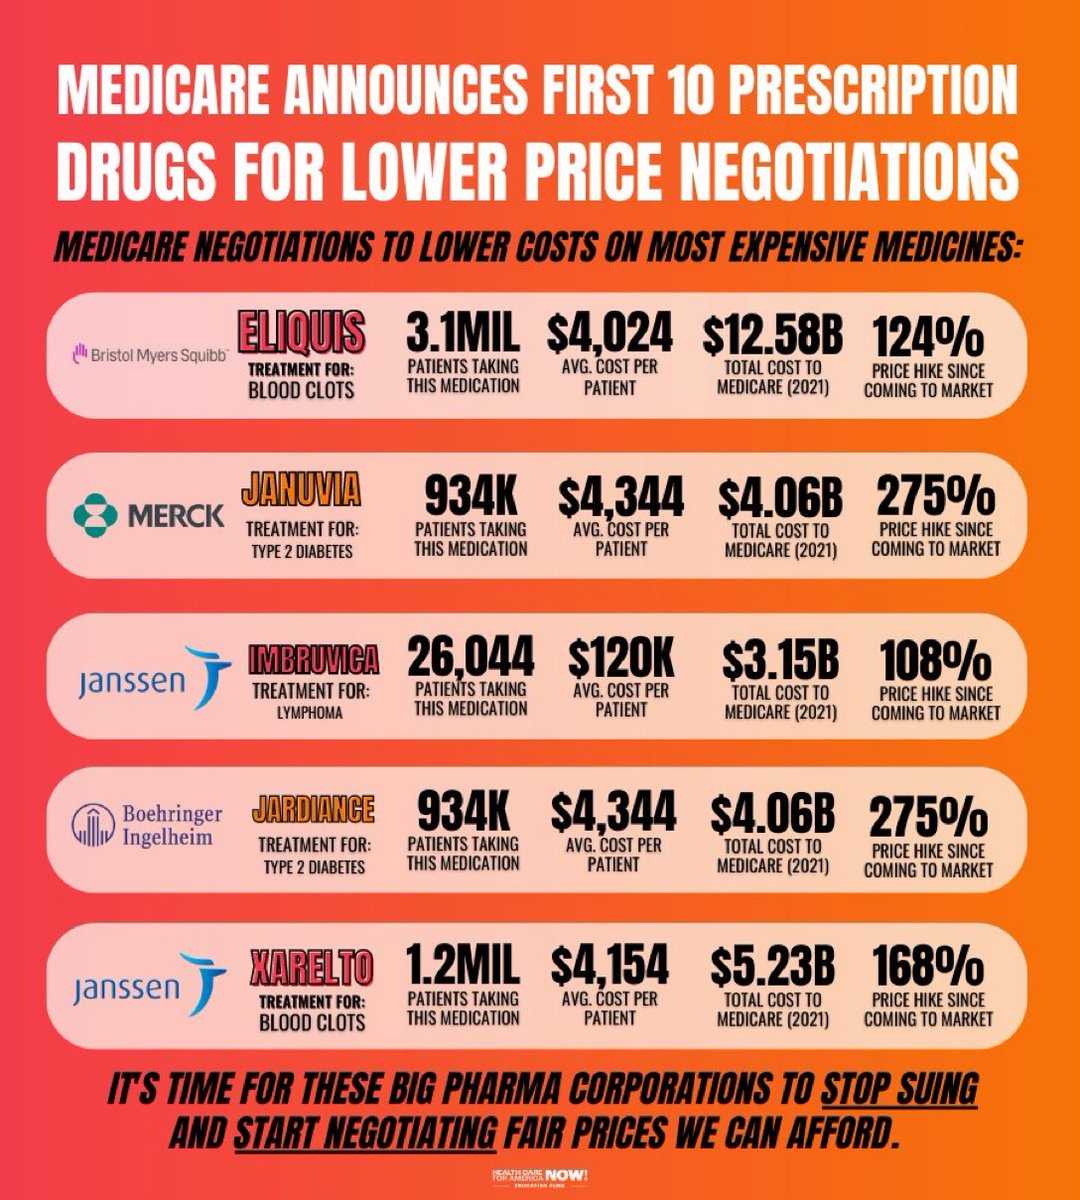 🧵1/3 Yesterday Biden announced the 1st drugs Medicare will negotiate the prices of w/Big Pharma

This'll save taxpayers $100 billion over 10yrs while also reducing Seniors' drug costs

#DemocratsLowerDrugCosts #Bidenomics  #DrugPrices #BidenDelivers #DemocratsDeliver #ABlueView